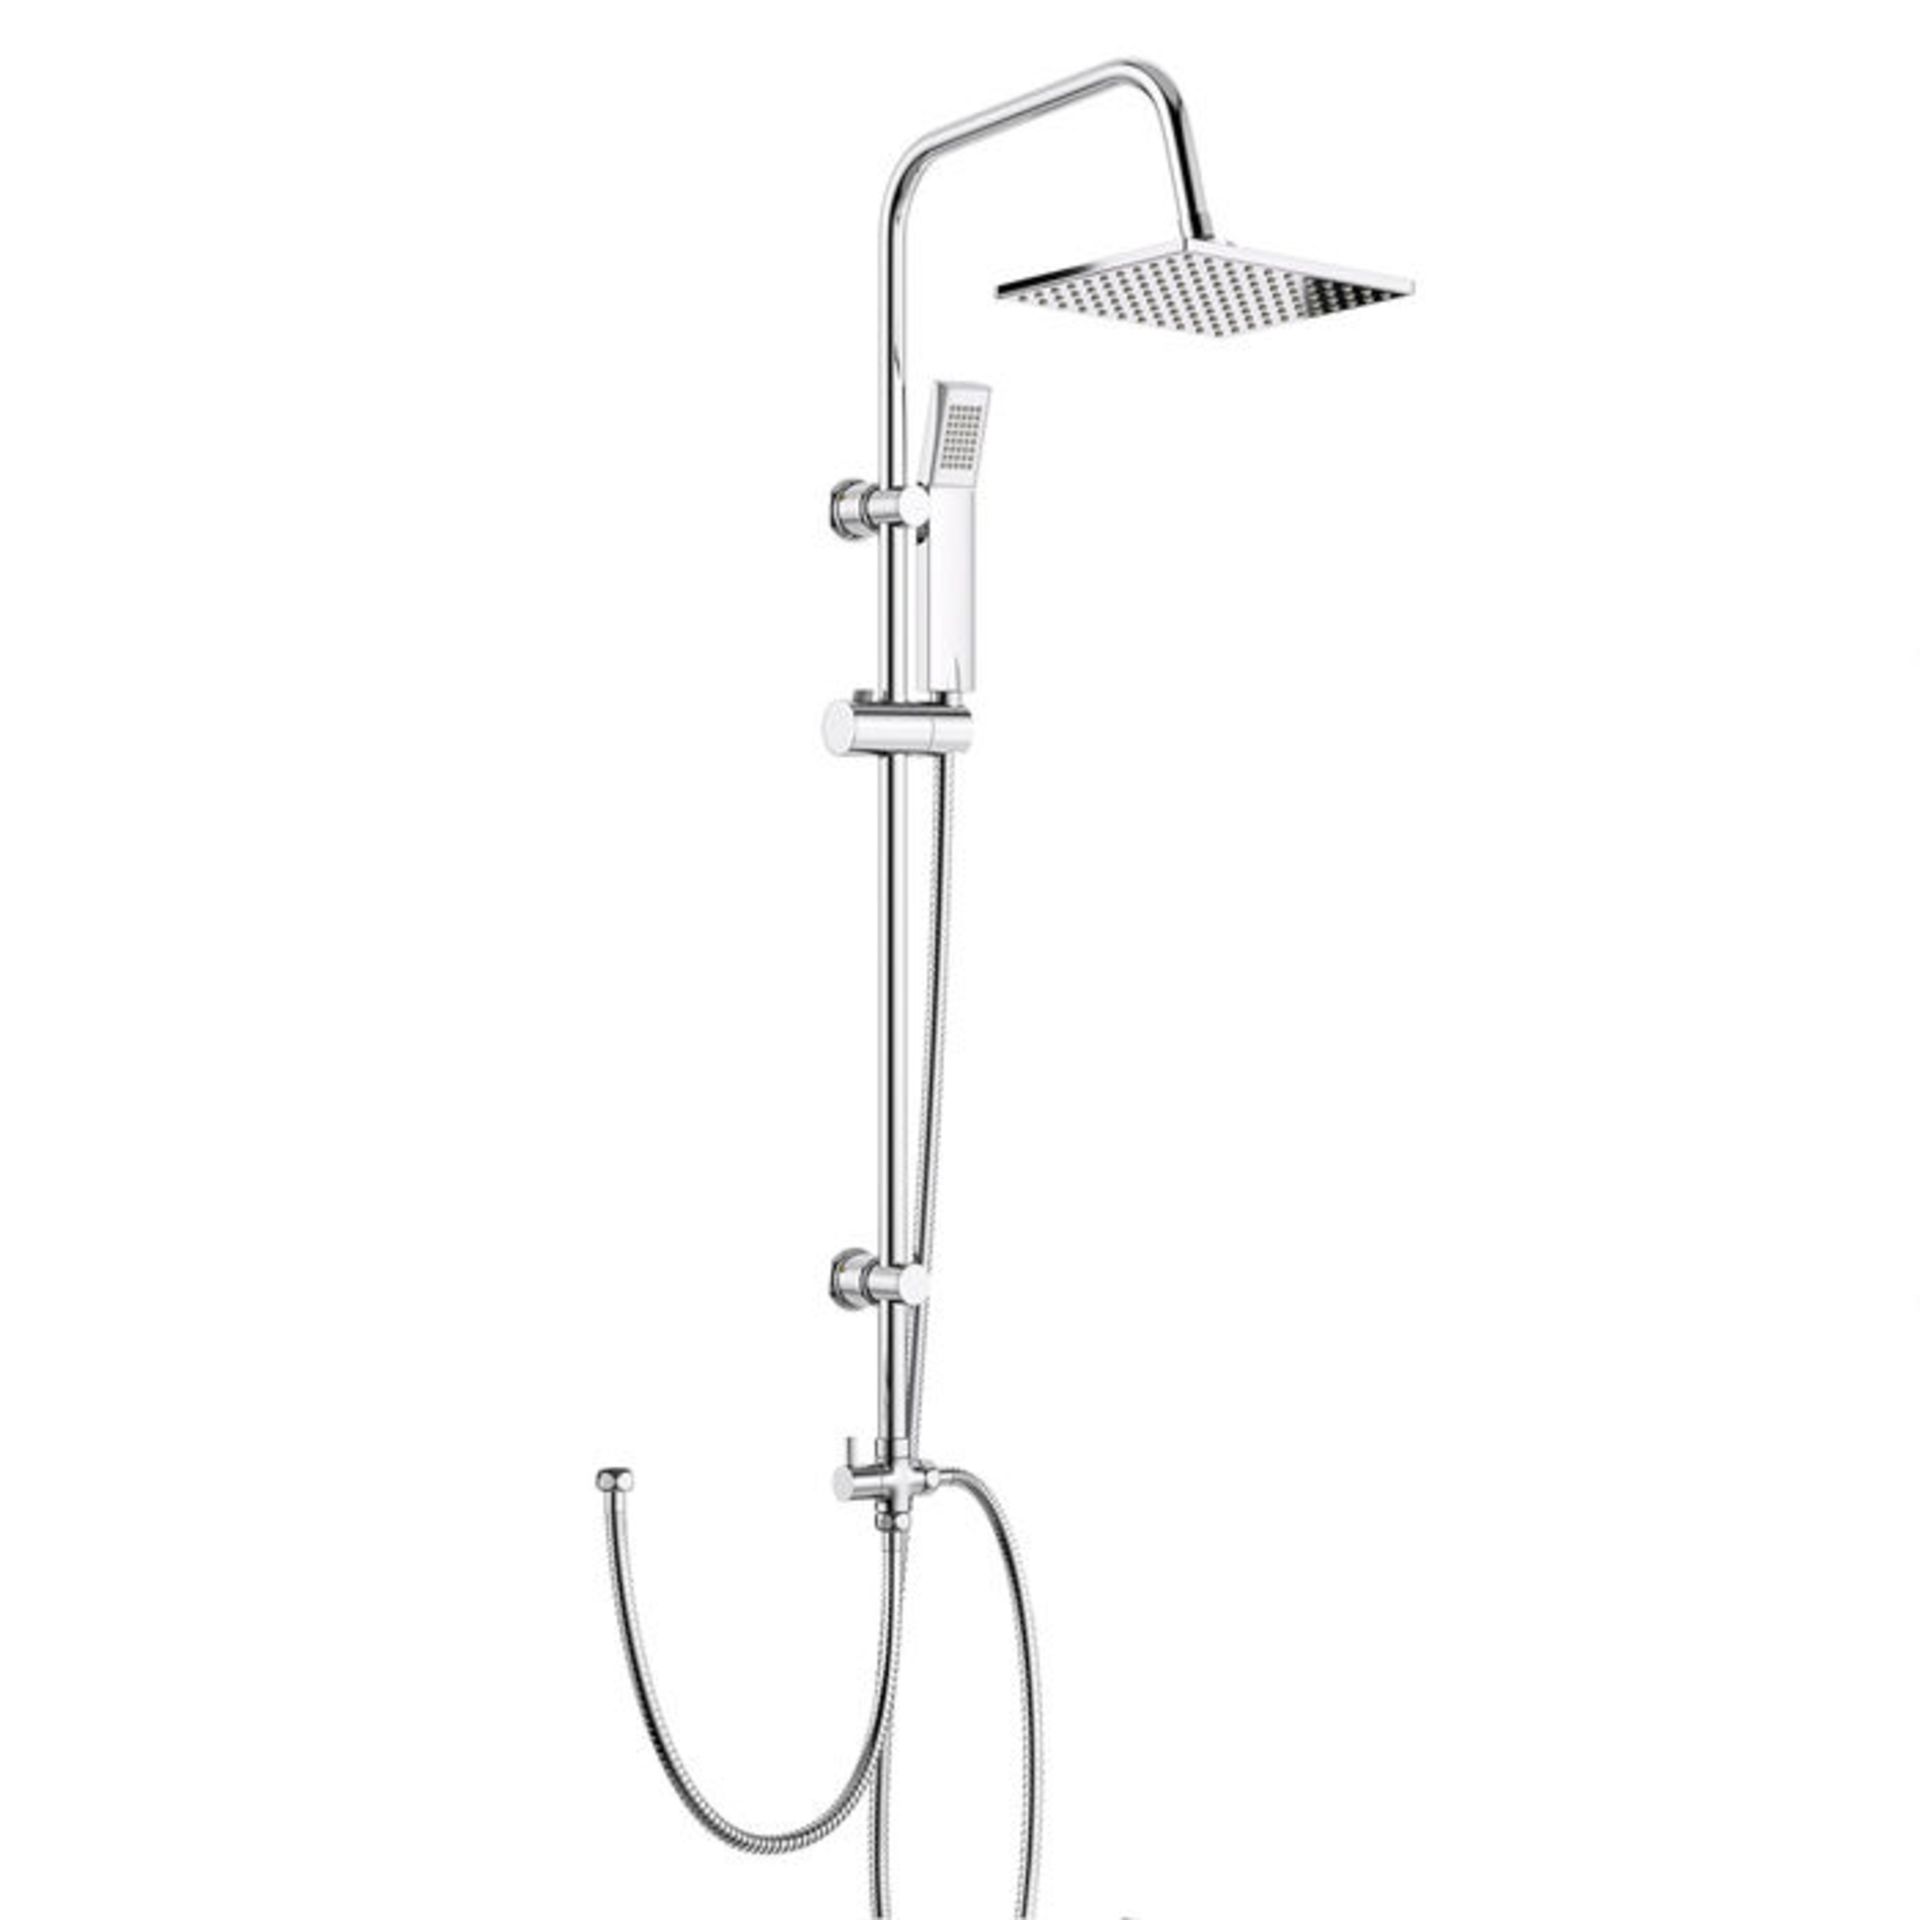 (PA29) 200mm Square Head, Riser Rail & Handheld Kit. Quality stainless steel shower head with Easy - Image 2 of 5